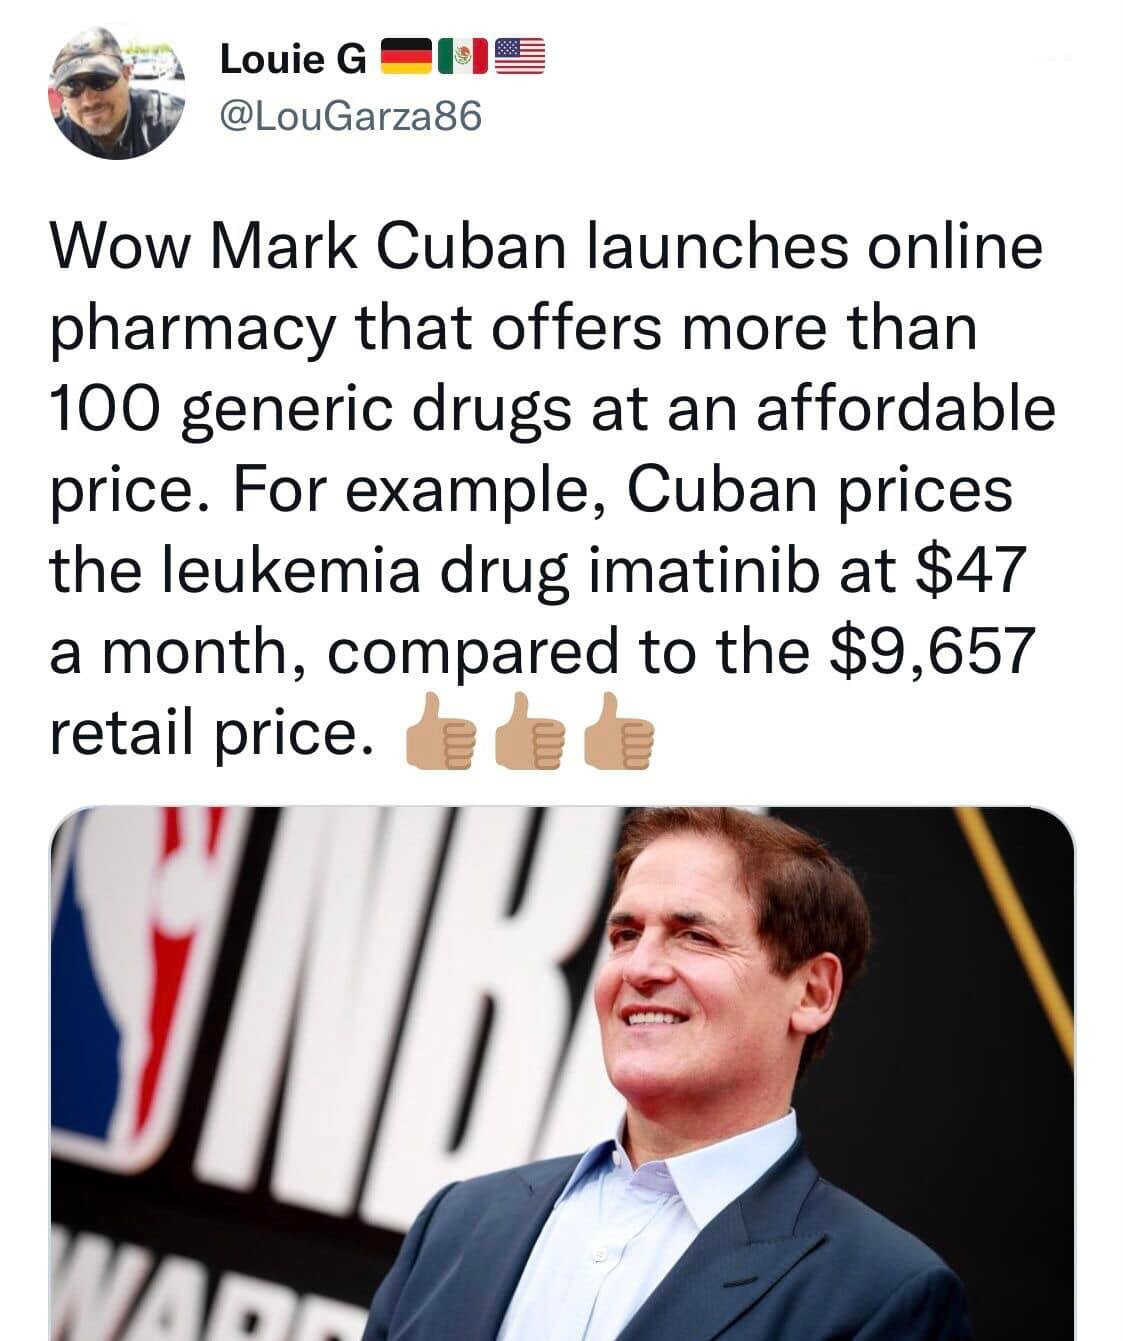 May be an image of 2 people and text that says 'Louie G @LouGarza86 Wow Mark Mark Cuban launches online pharmacy that offers more than 100 generic drugs at an affordable price. For example, Cuban prices the leukemia drug imatinib at $47 a month, compared to the $9,657 retail price.'